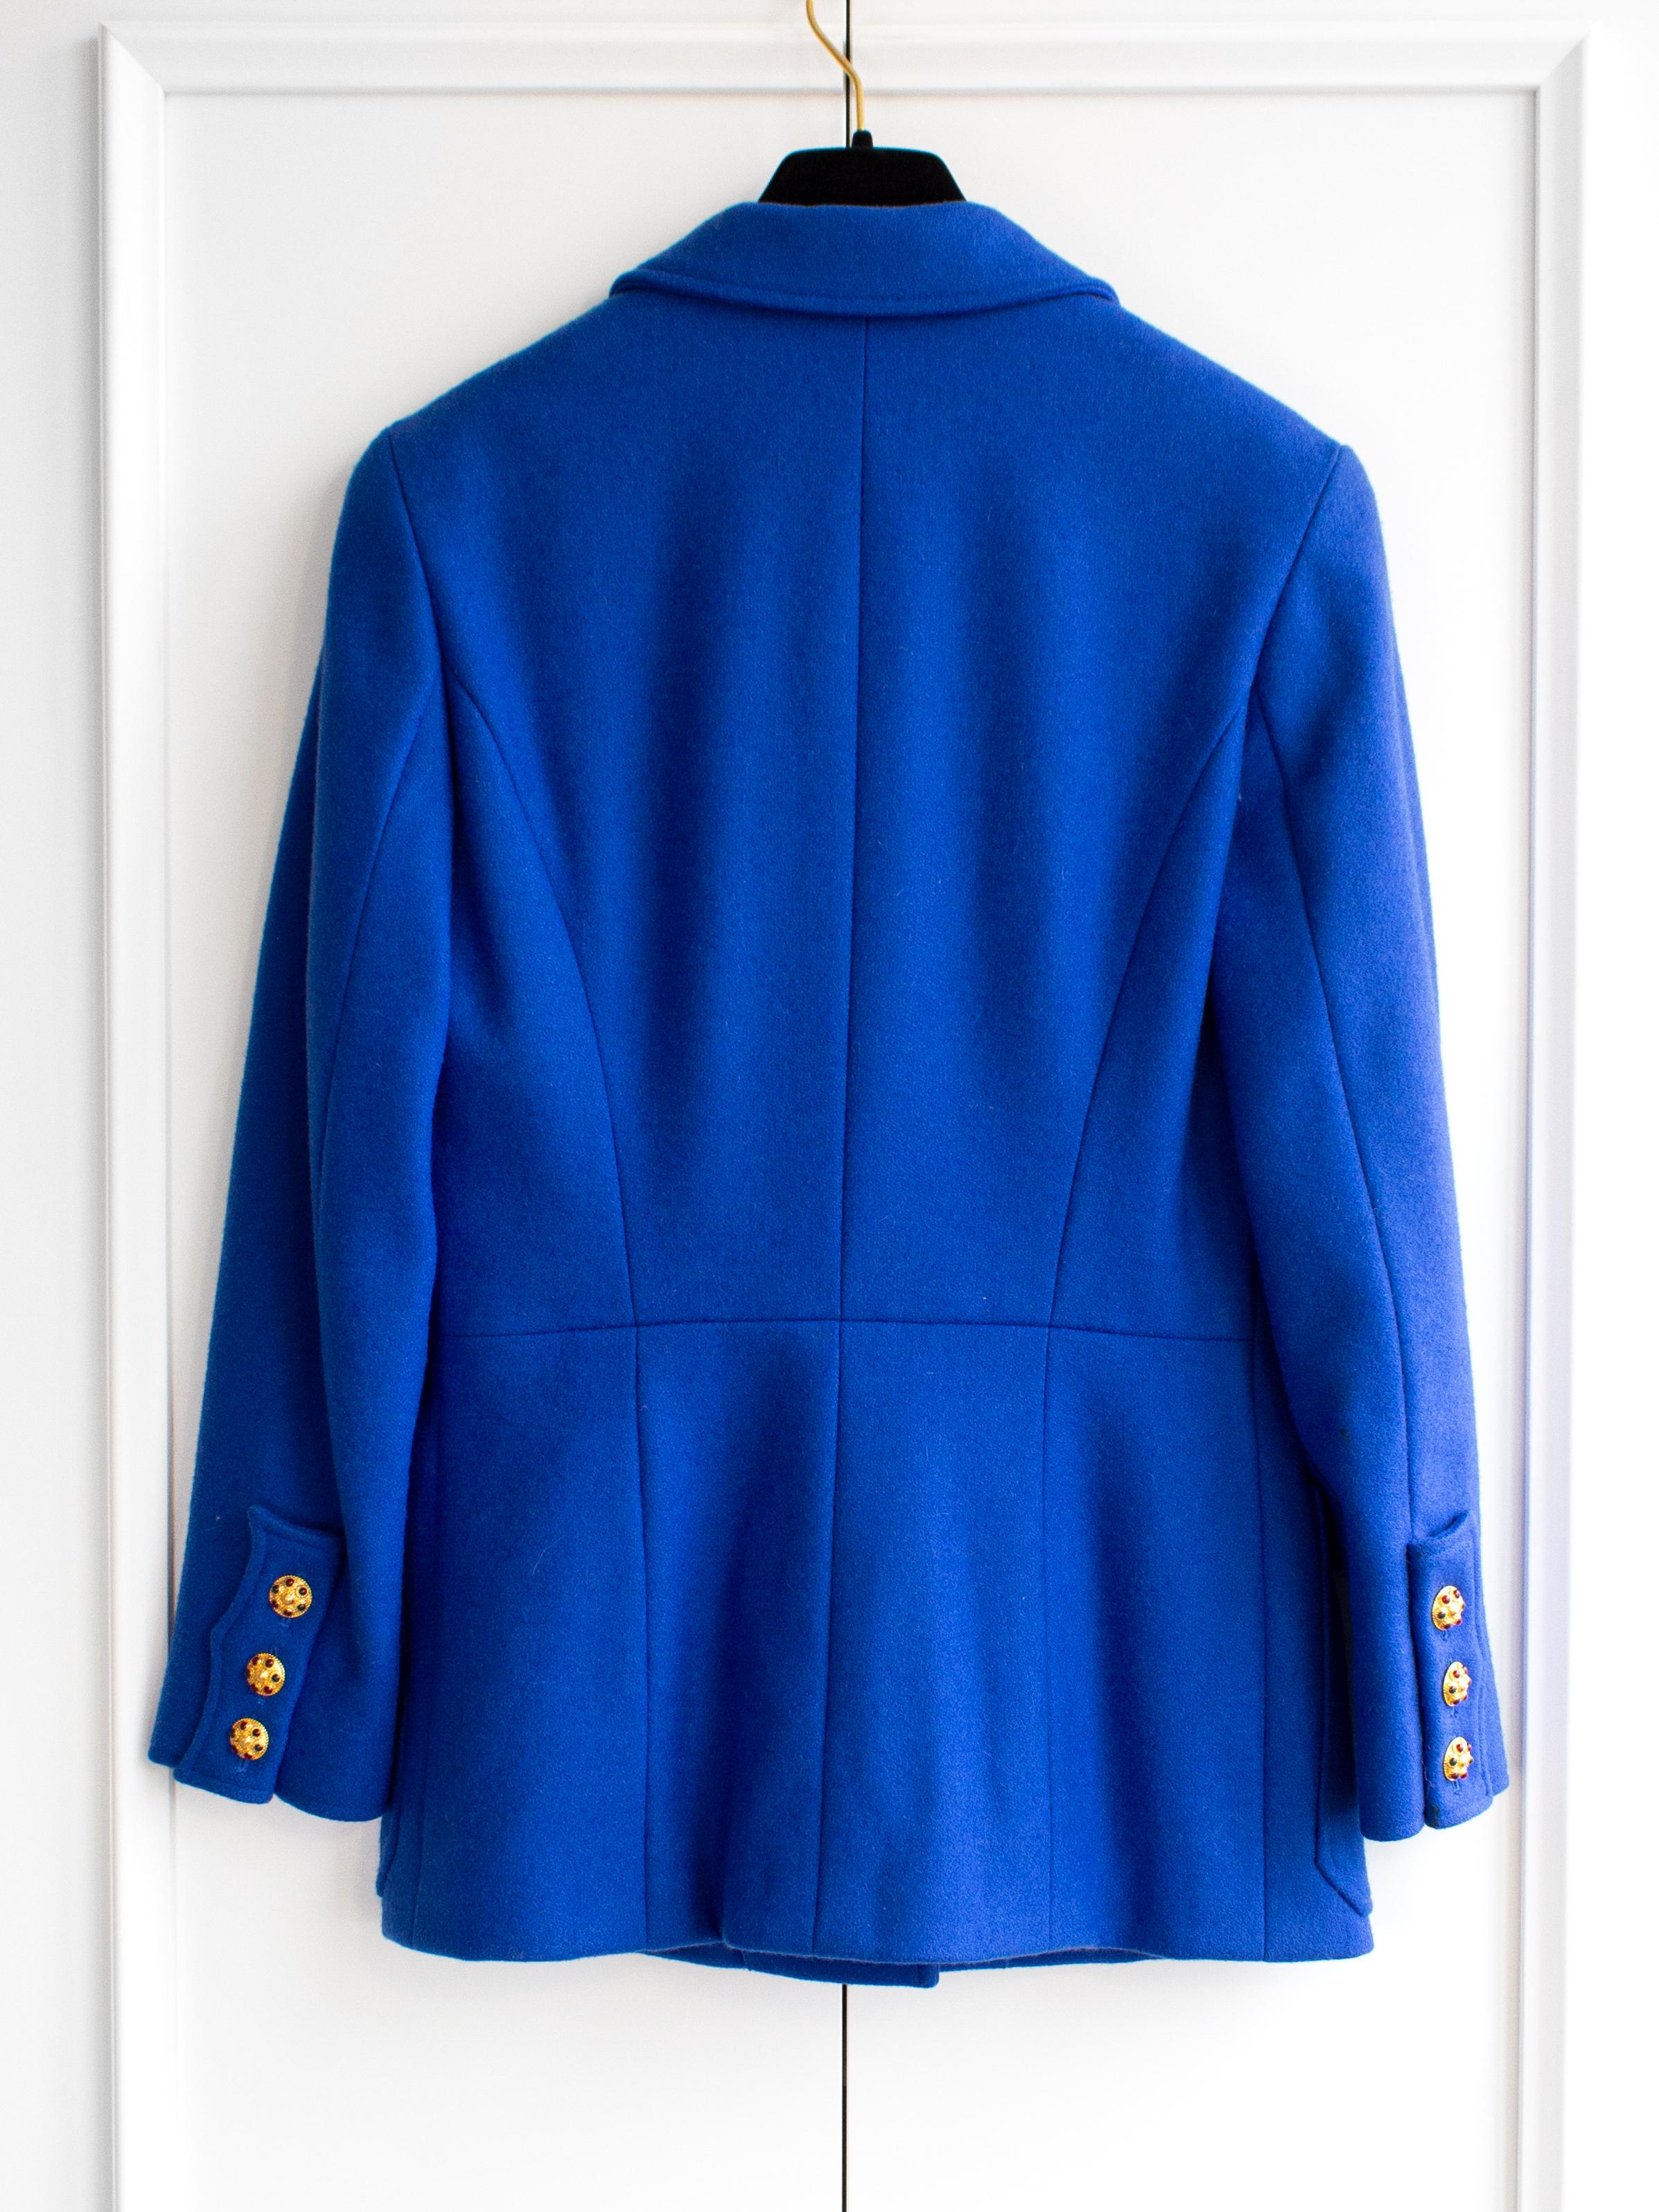 Chanel Vintage Fall/Winter 1996 Royal Blue Gold Gripoix 96A Wool Tweed Jacket For Sale 2